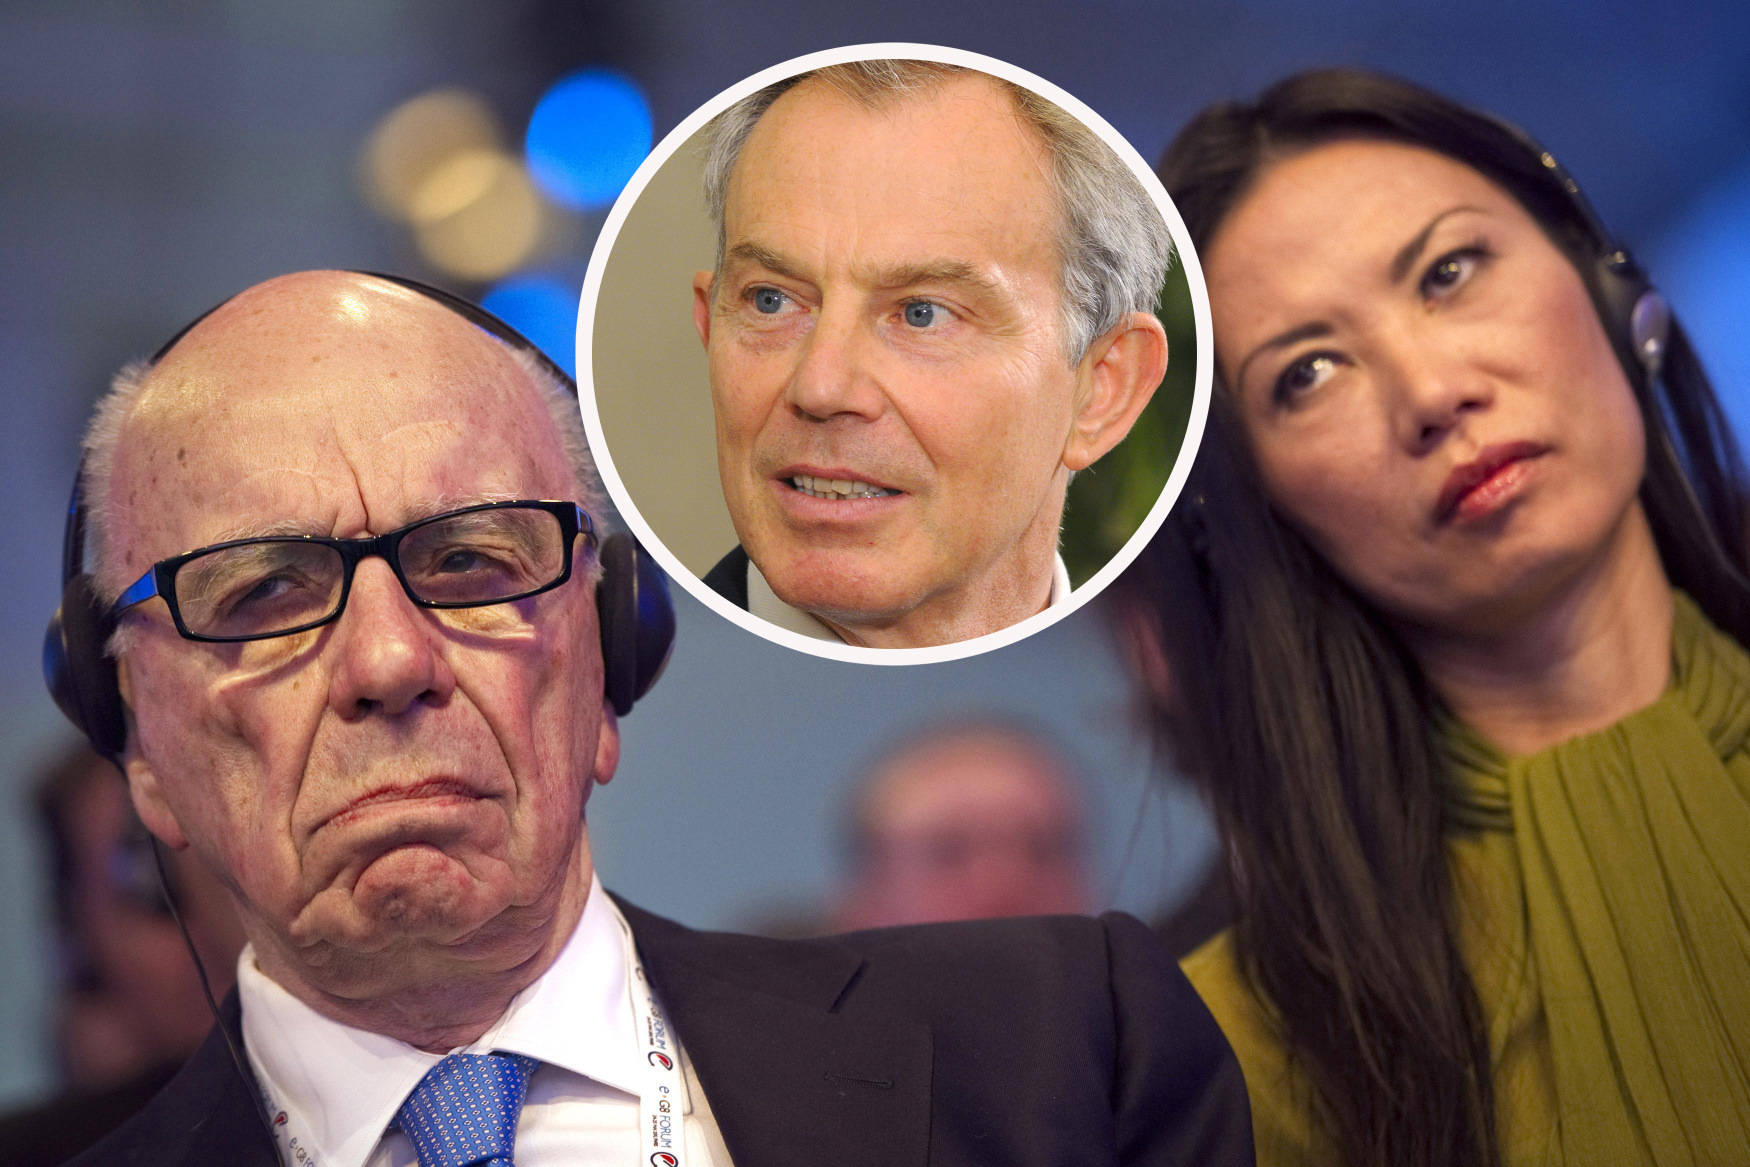 Rupert Murdoch (right) suggests he suspected an affair between Wendi Deng and ex-British prime minister Tony Blair (inset). Photos: Reuters Bloomberg